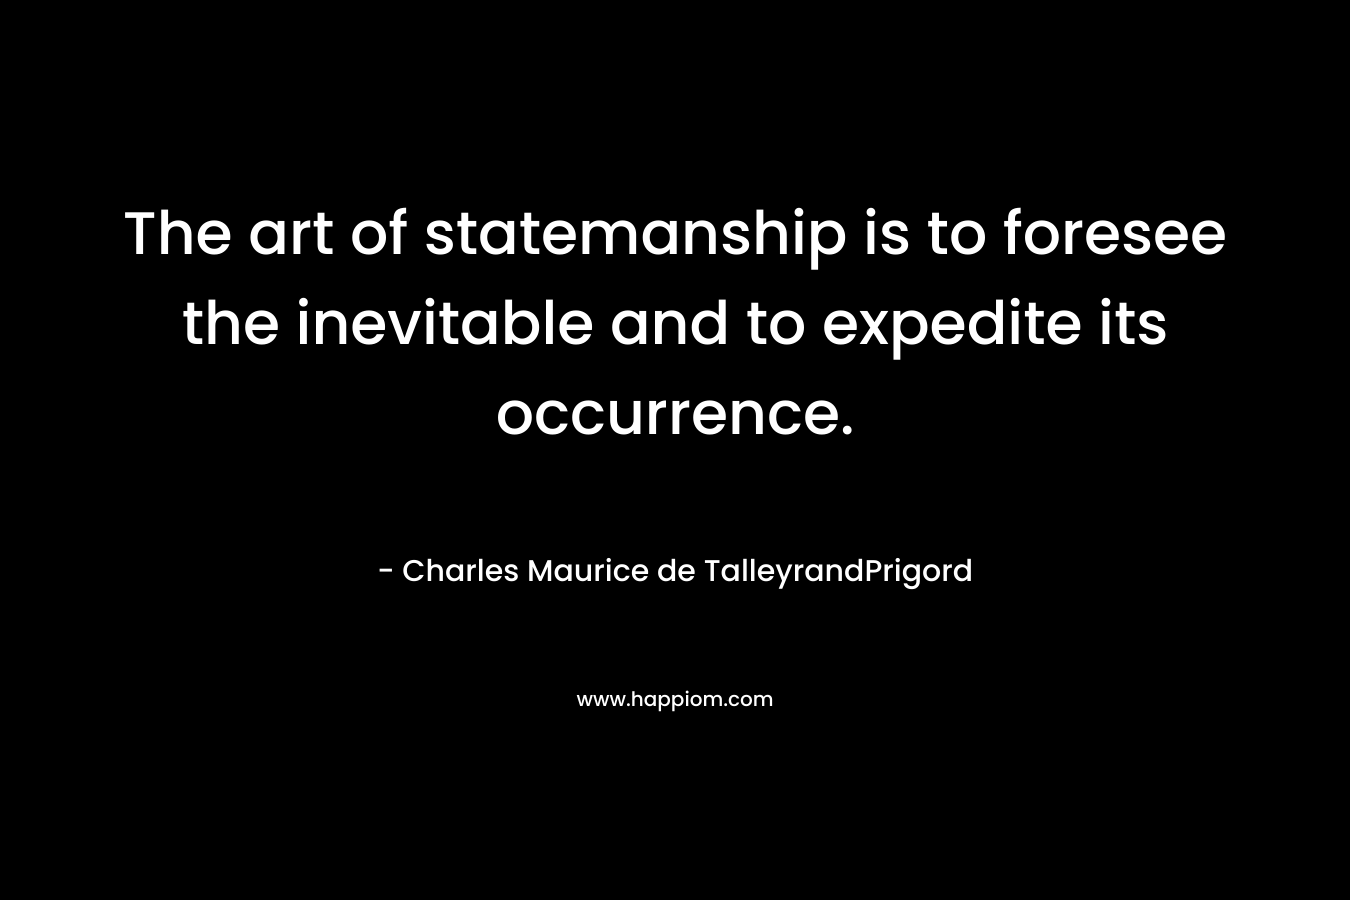 The art of statemanship is to foresee the inevitable and to expedite its occurrence.